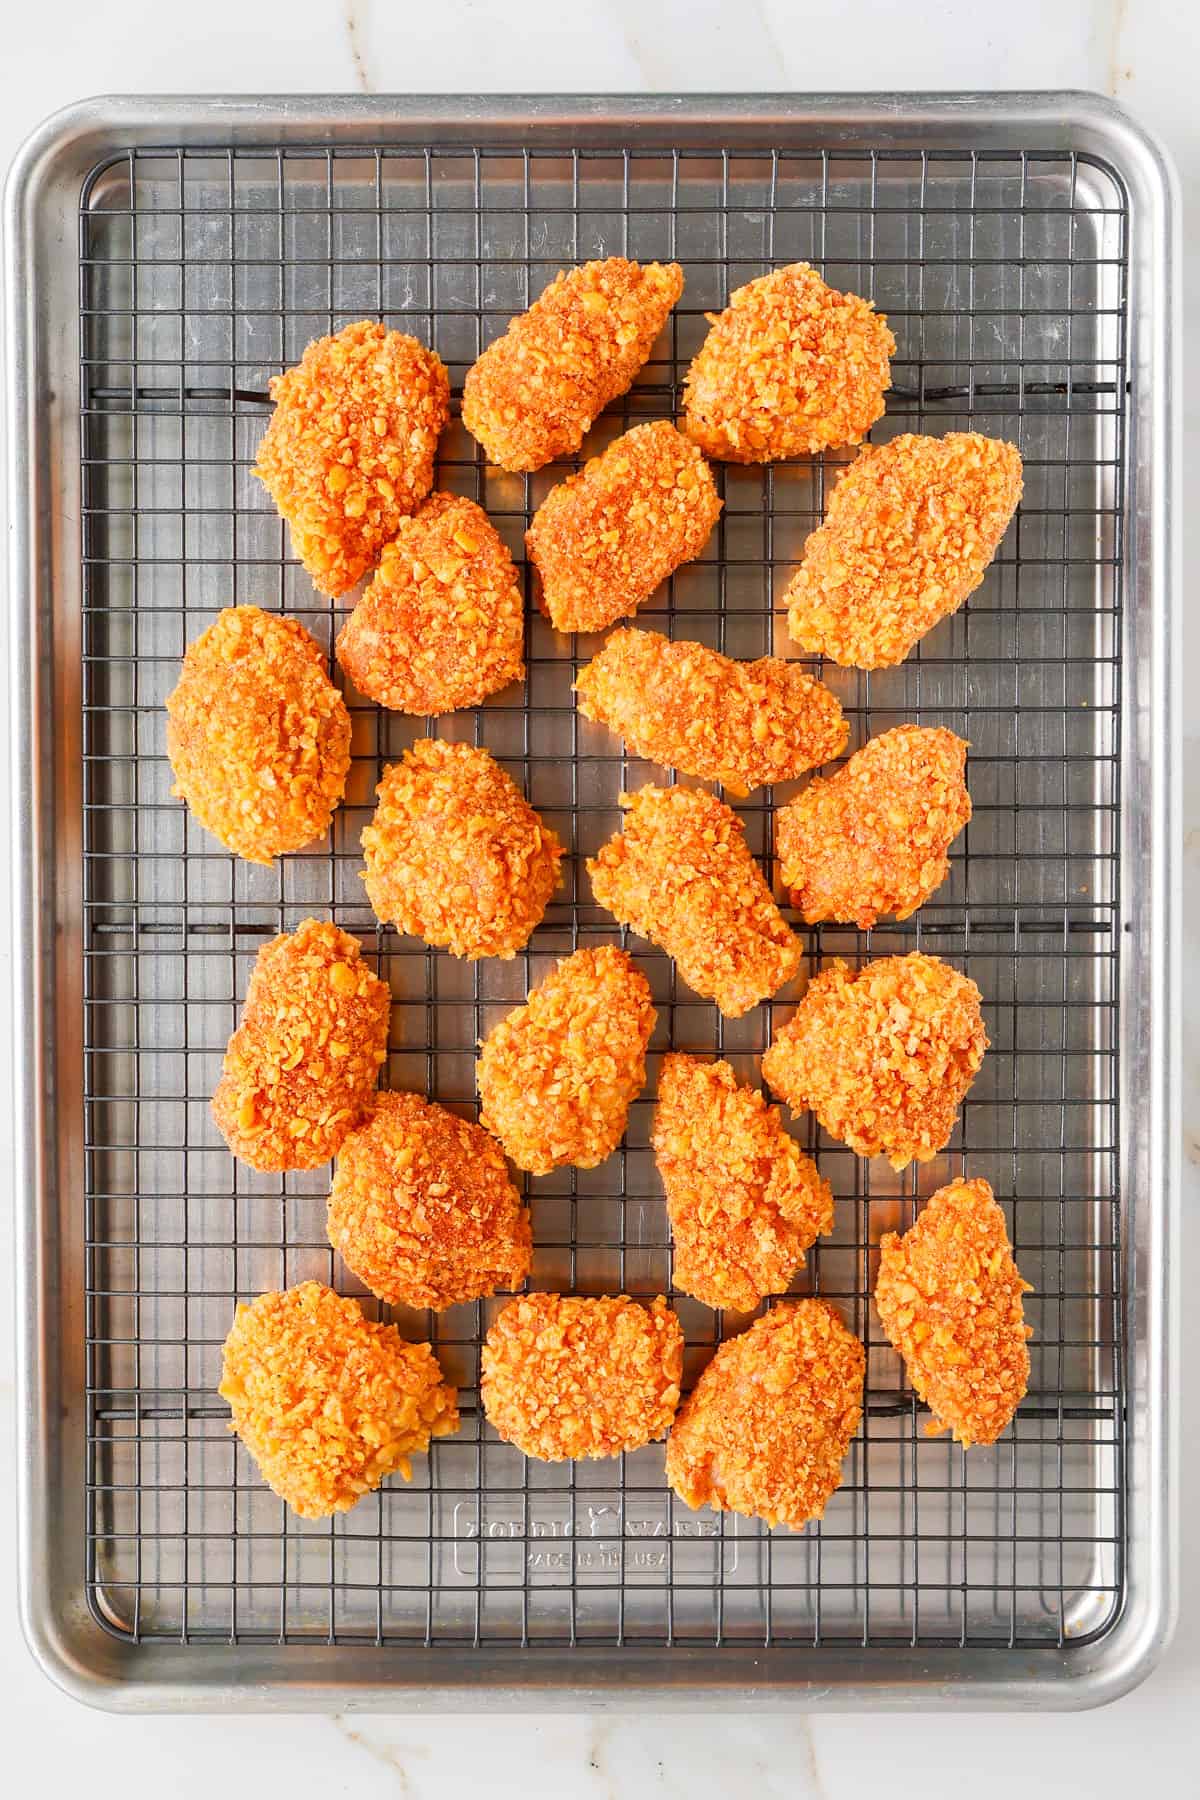 Crumbed chicken on a wire rack.